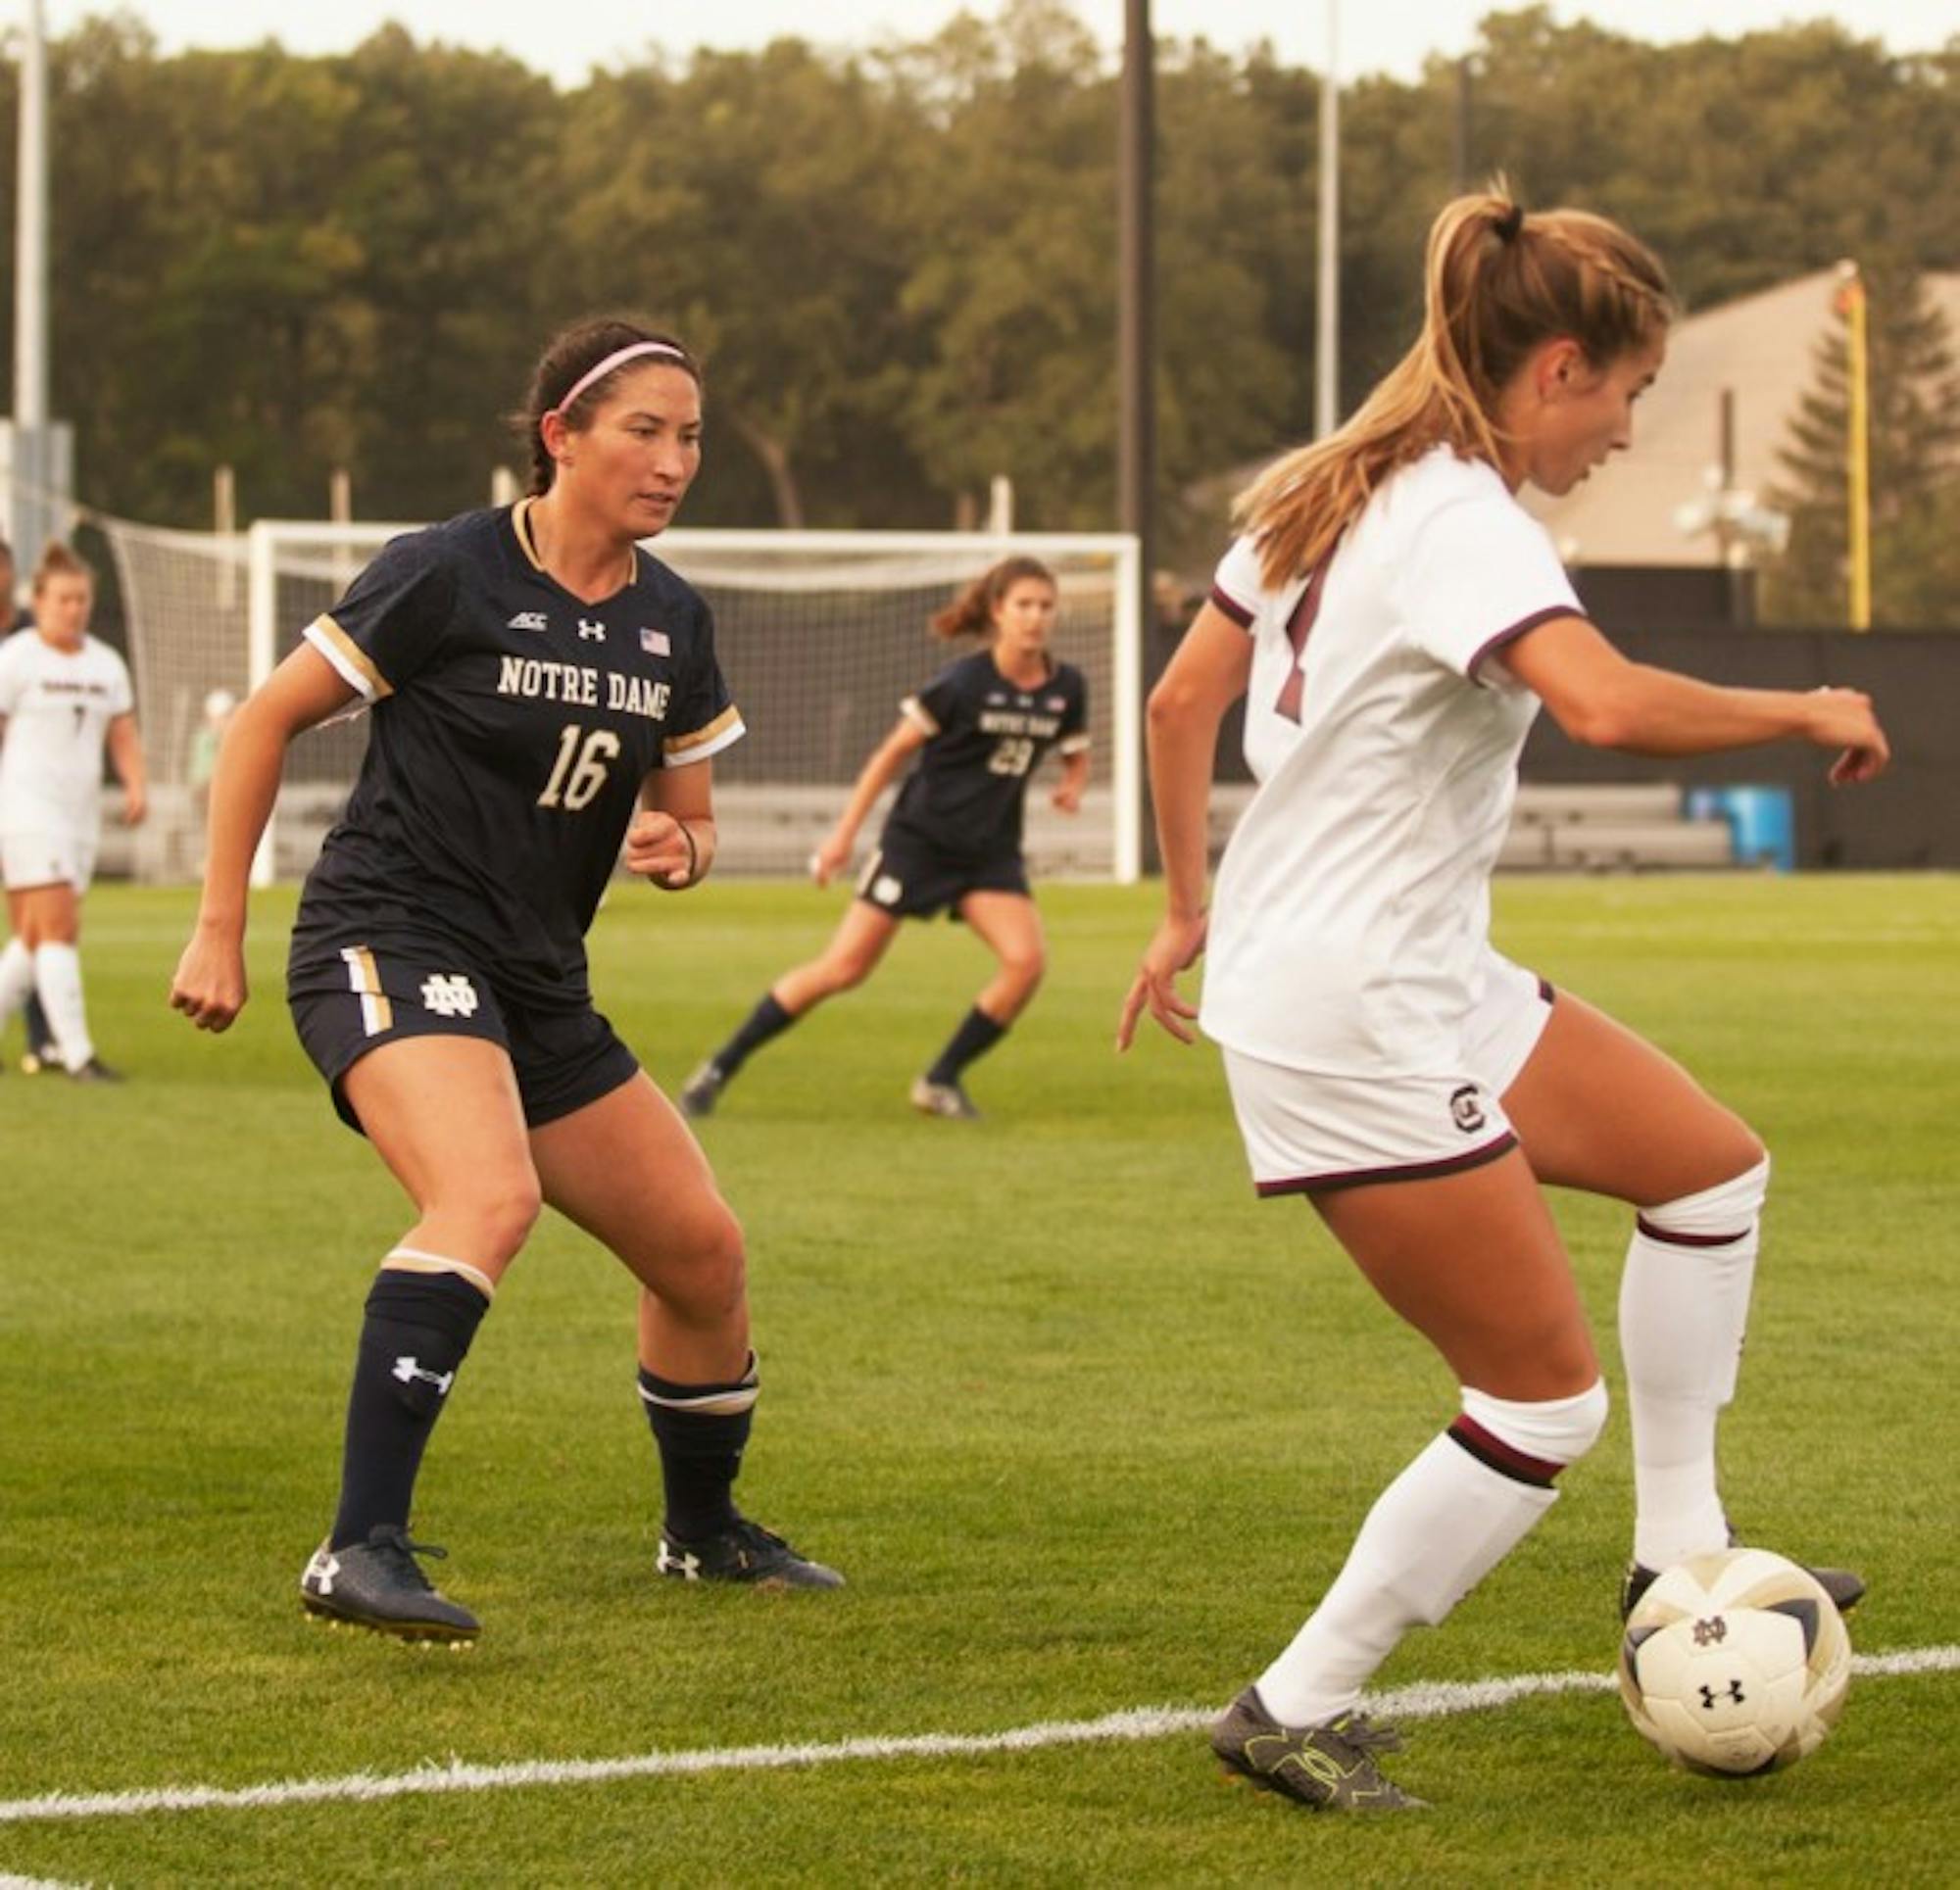 Graduate student and midfielder Sandra Yu defends her half during Notre Dame's 1-0 loss to South Carolina on Sept. 1.